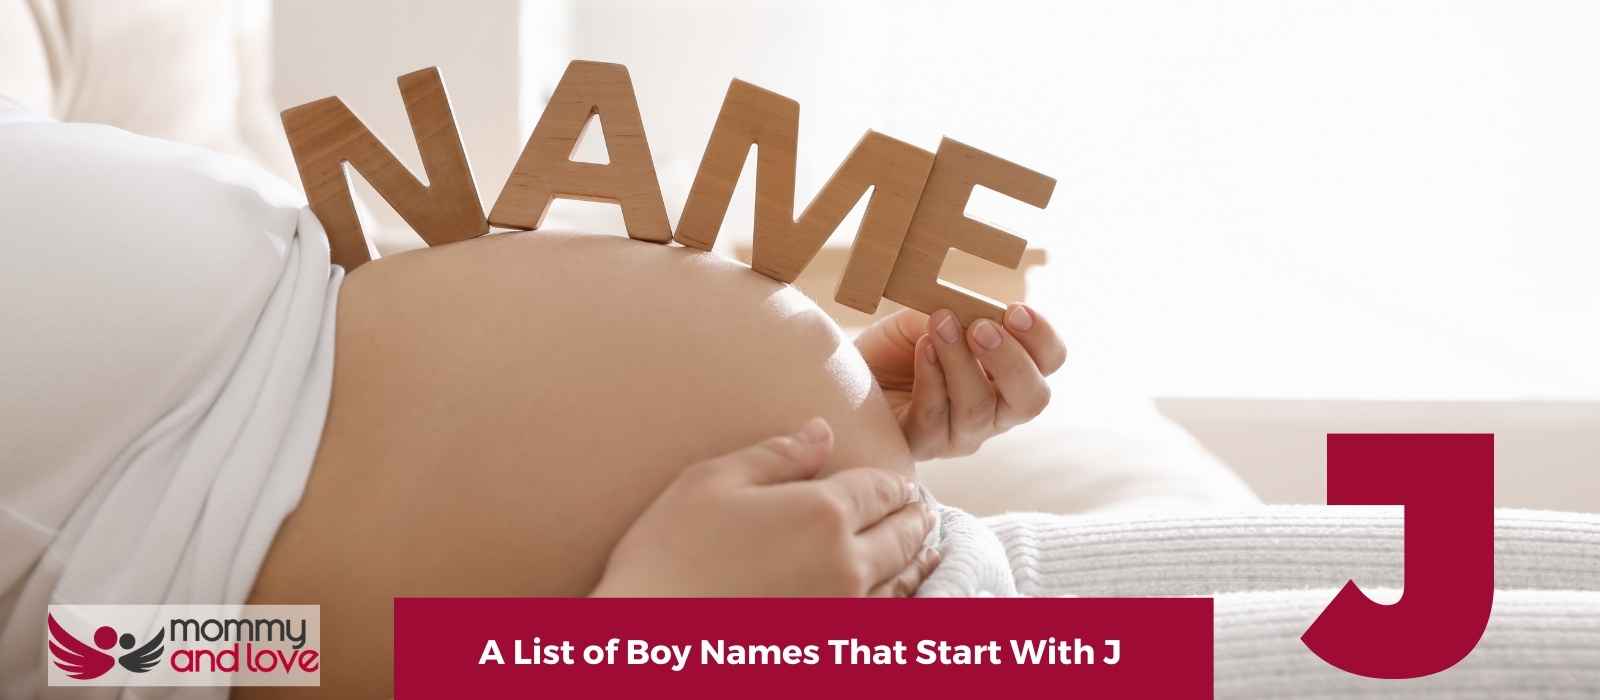 A List of Boy Names That Start With J